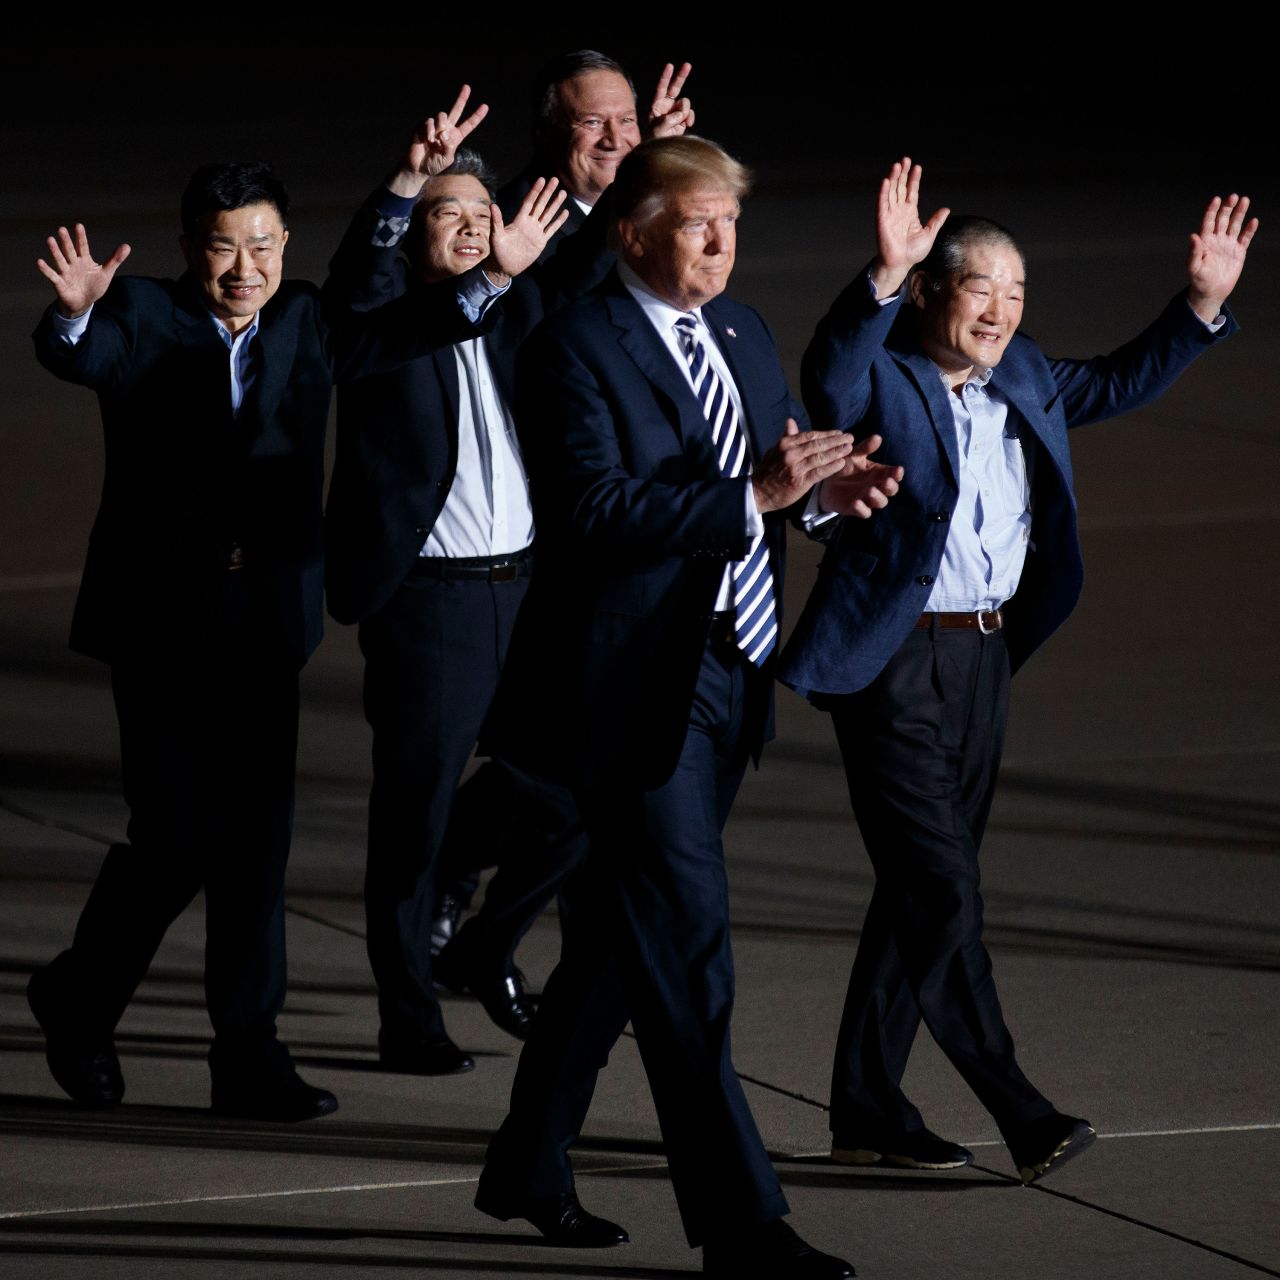 Three Americans<a href="https://www.cnn.com/2018/05/10/politics/trump-north-korea-freed-americans/index.html" target="_blank"> released by North Korea</a> are welcomed at Andrews Air Force Base in Maryland by Trump and Secretary of State Mike Pompeo in May 2018. Kim Dong Chul, Kim Hak-song and Kim Sang Duk, also known as Tony Kim, were freed while <a href="https://www.cnn.com/2018/05/09/politics/mike-pompeo-north-korea-prisoners-tick-tock/index.html" target="_blank">Pompeo was visiting North Korea</a> to discuss Trump's upcoming summit with North Korean leader Kim Jong Un.